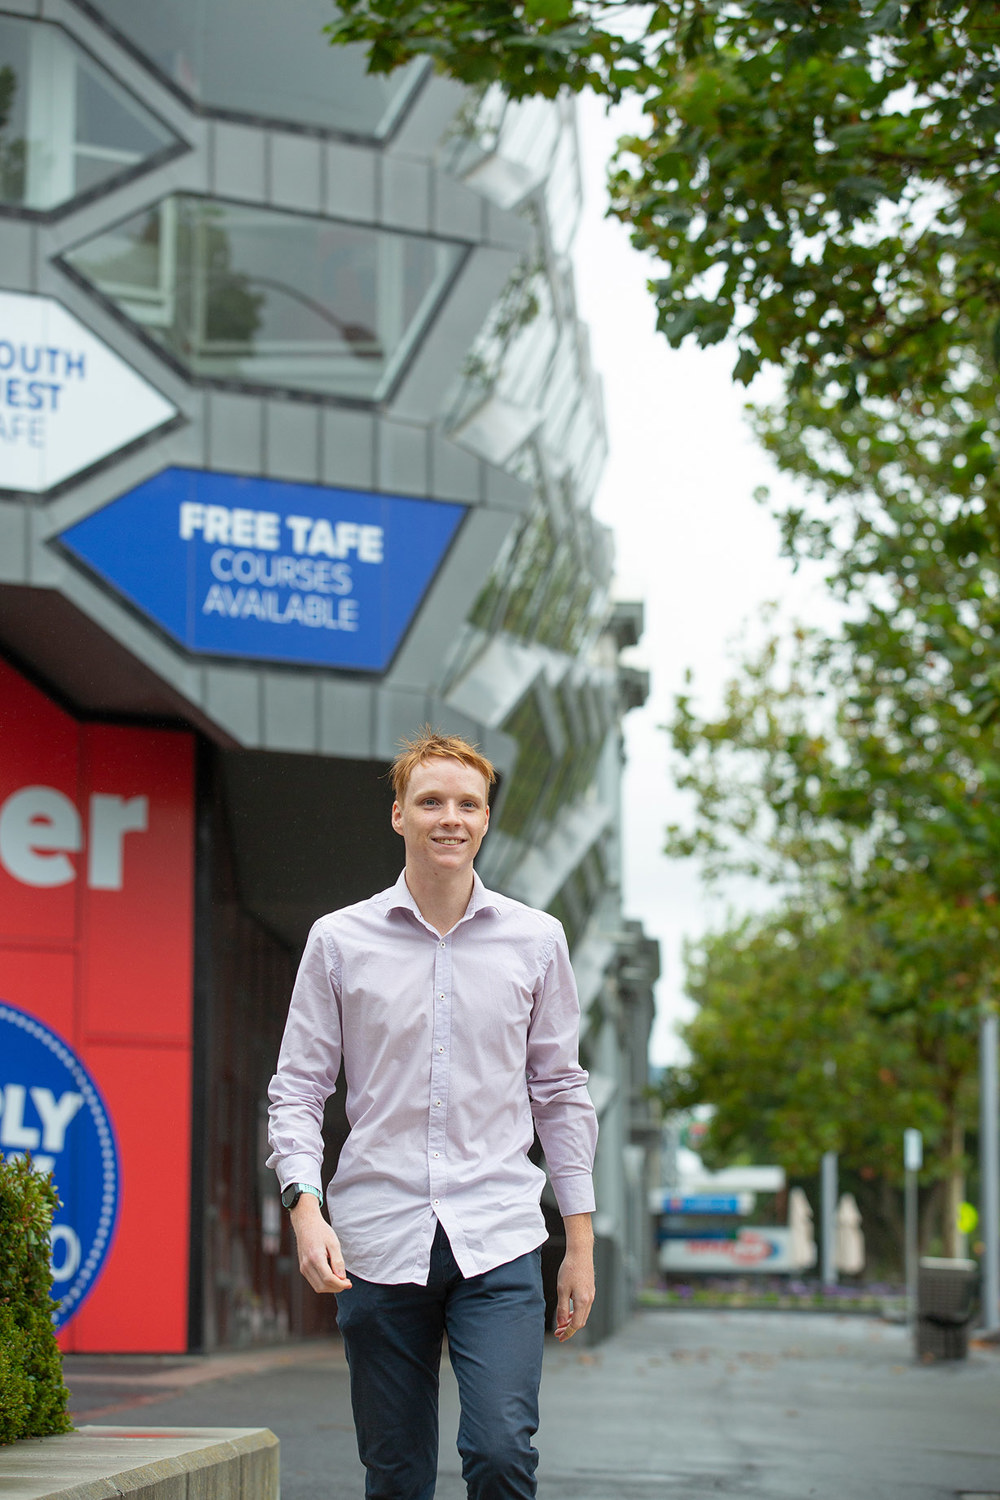 Sean O'Keefe completed a traineeship in the Certificate III in Tourism with South West TAFE